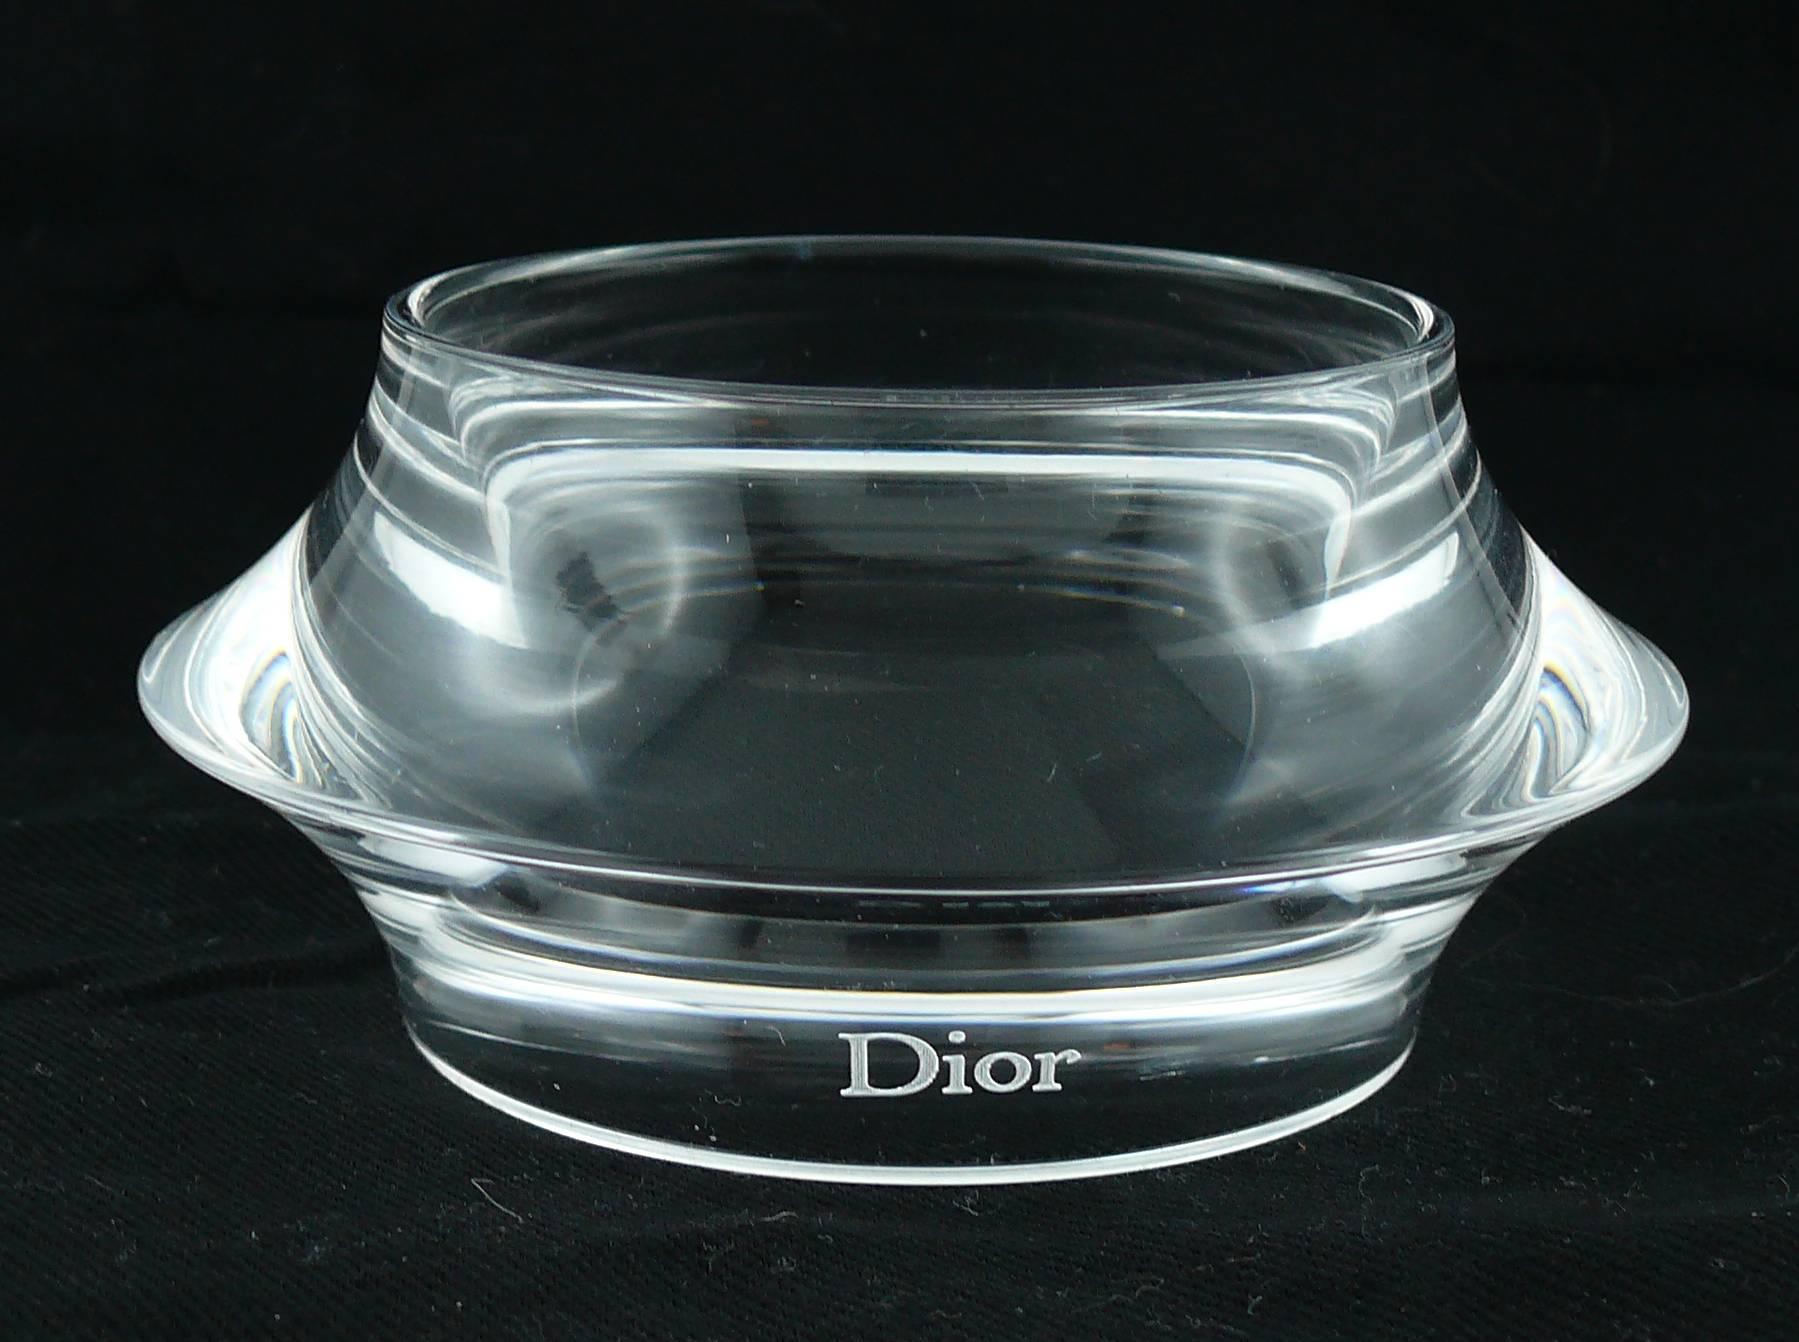 CHRISTIAN DIOR clear lucite cuff and bangle bracelets set.

Embossed DIOR.

CUFF BRACELET
Indicative measurements : inner circumference approx. 20.42 cm (8.04 inches) / width approx. 4.9 cm (1.93 inches).

BANGLE BRACELET
Indicative measurements :